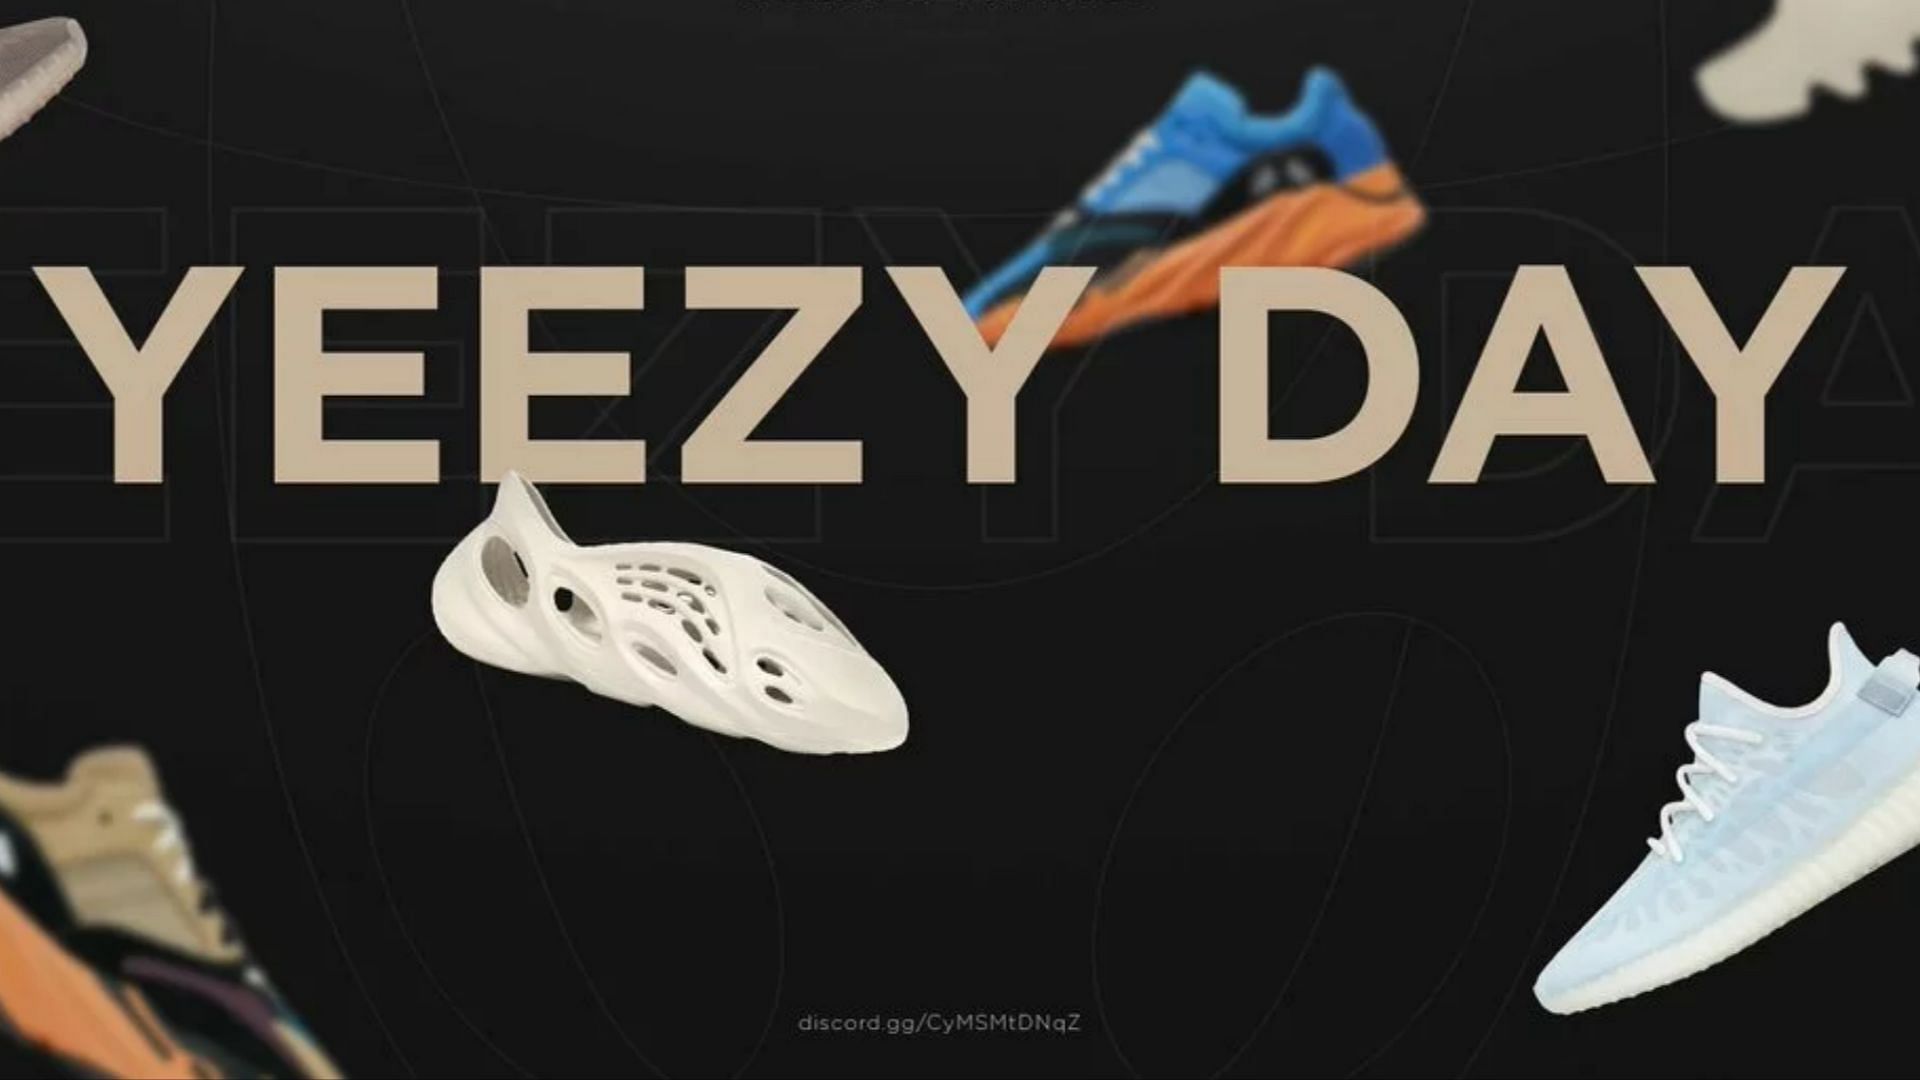 Yeezy Day 2022 rollout began on August 2, 2022 (Image via @toejam1027 / Twitter)